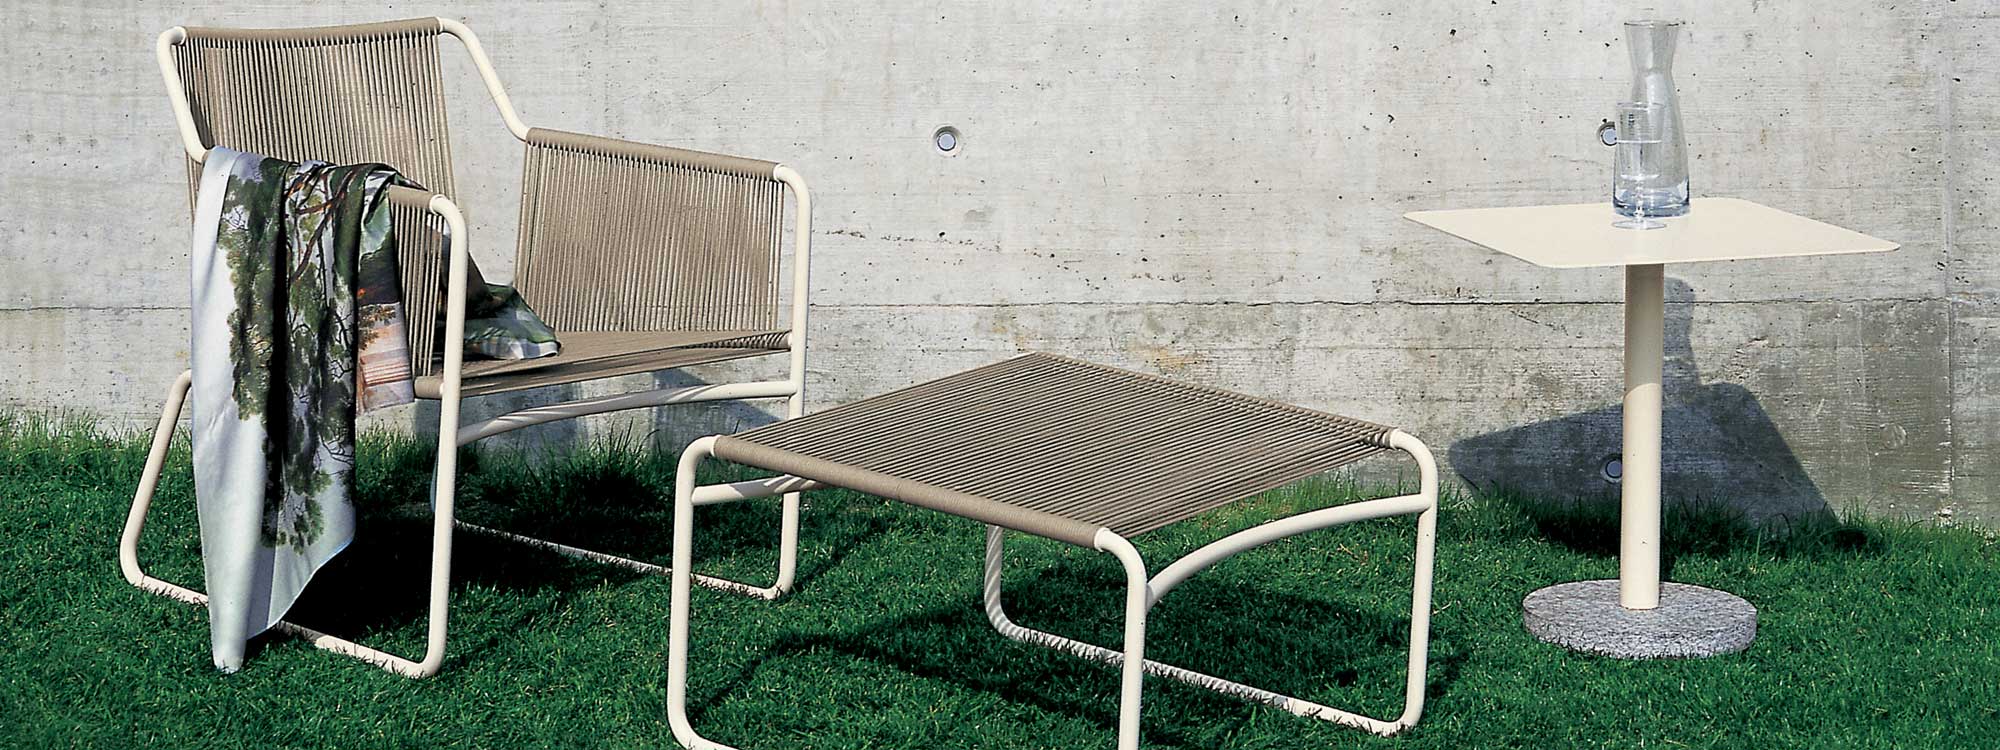 Harp outdoor lounge chair & footstool with Bernardo side table on lawn